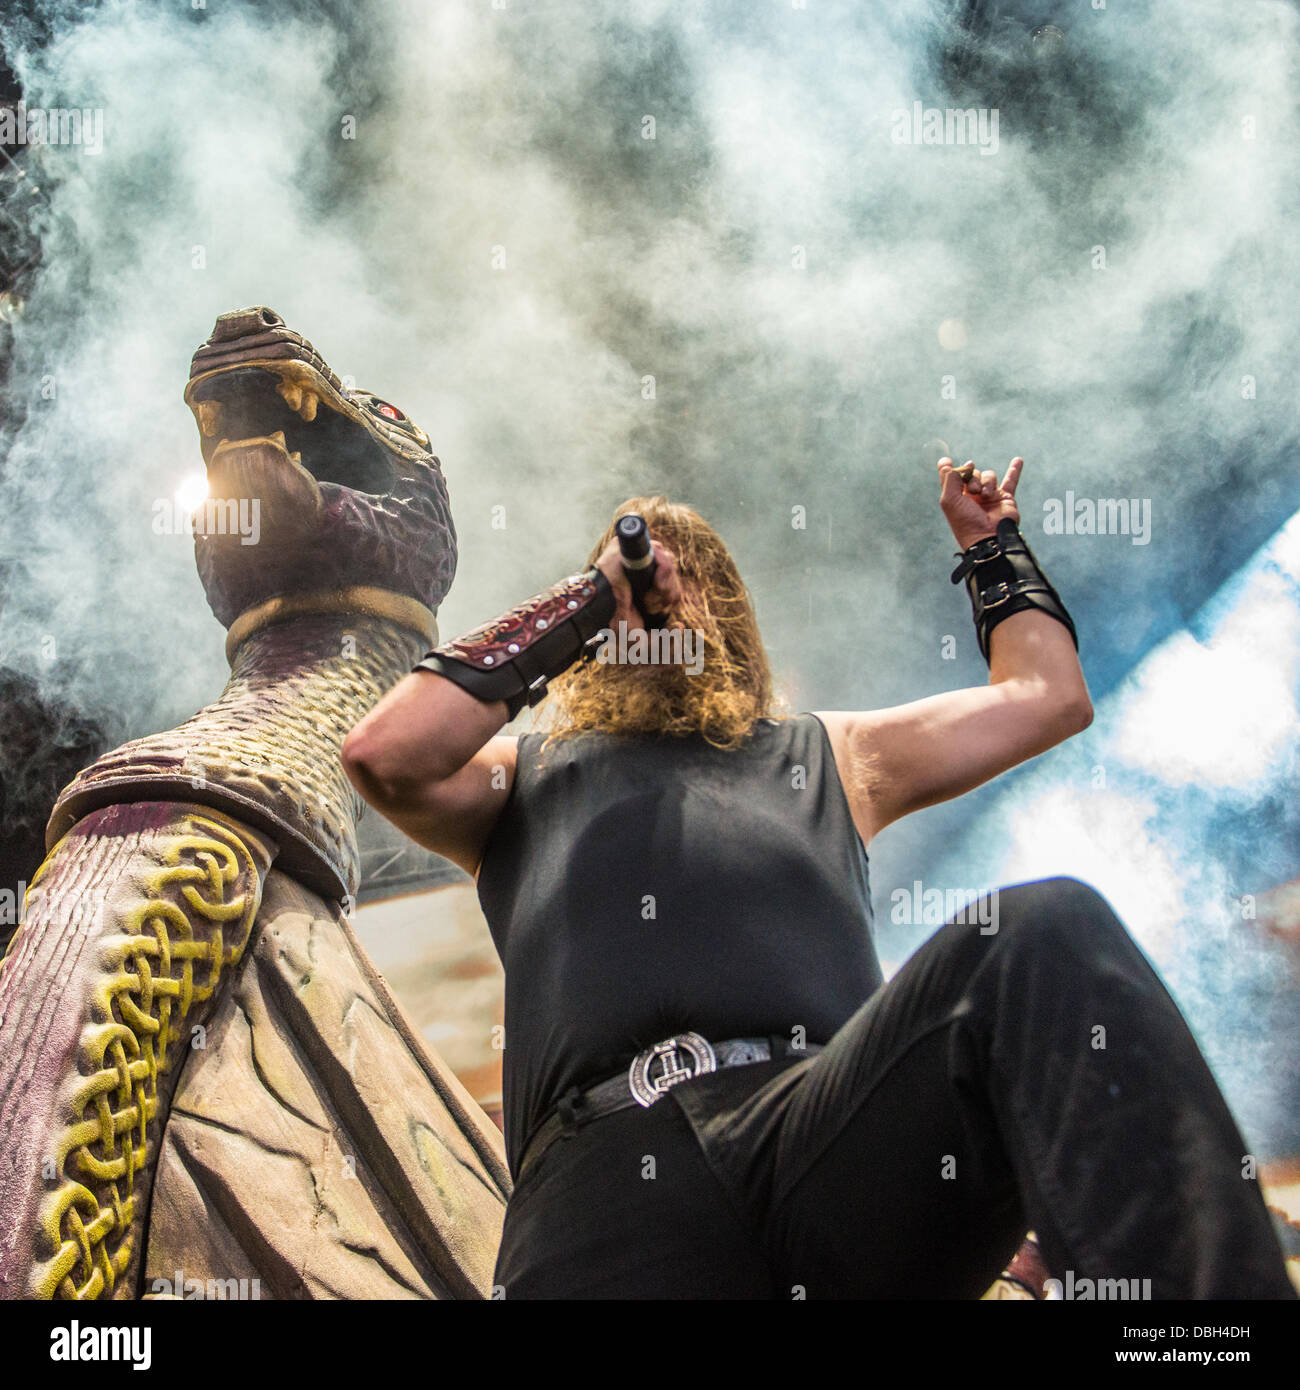 Swedish Heavy Metal band Amon Amarth performing live at Mayhem Fest 2013. Amon Amarth is a melodic death metal band from Tumba, Sweden. They got their moniker from the Sindarin name of Mount Doom, a volcano in J. R. R. Tolkien′s Middle-earth. The band's lyrics revolve around Viking history and mythology. The band is vocalist Johan Hegg, guitarists Olavi Mikkonen and Johan Söderberg, bassist Ted Lundström and drummer Fredrik Andersson Stock Photo